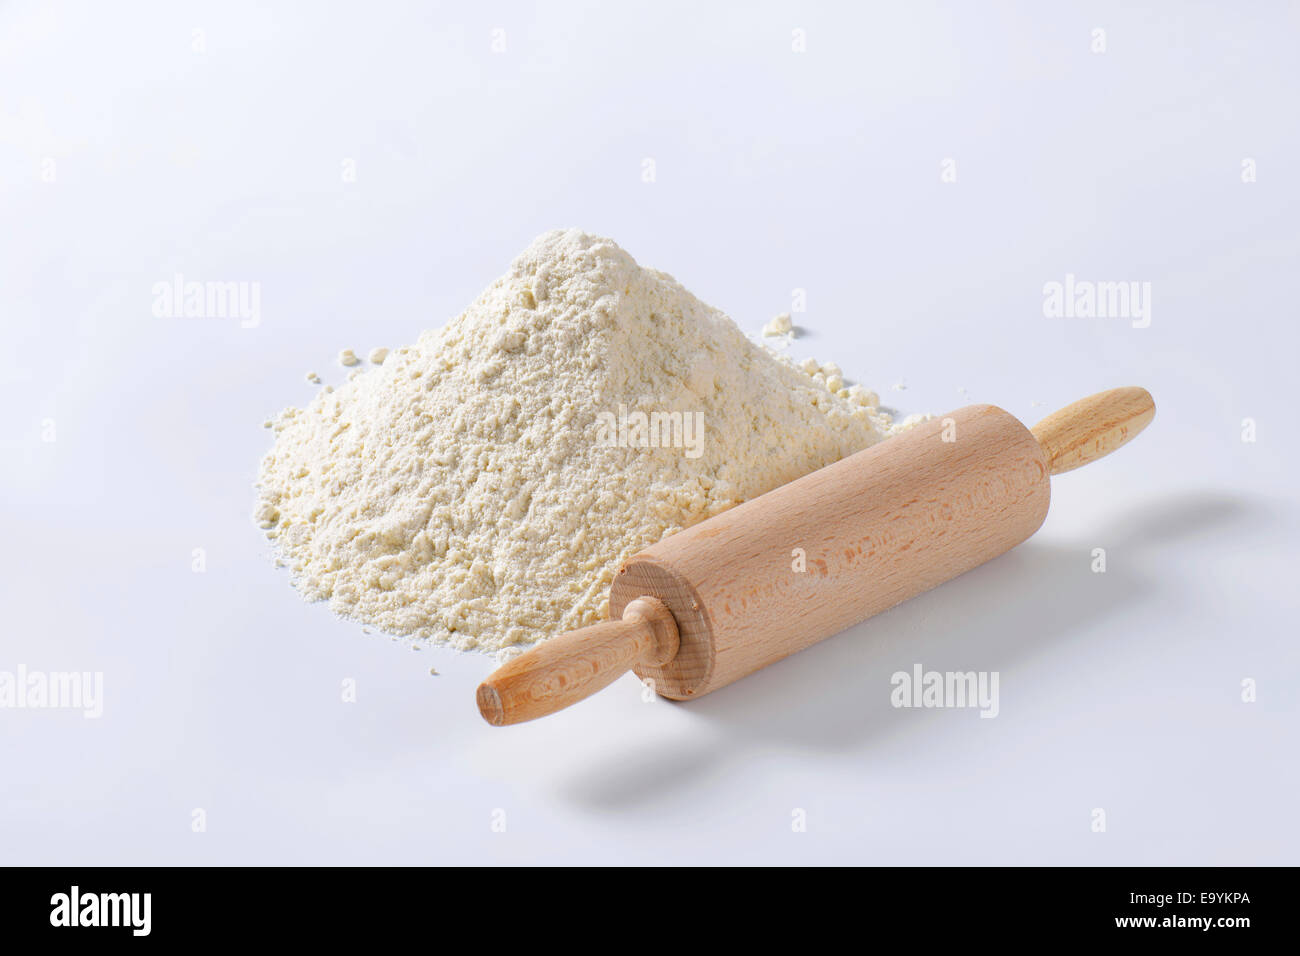 Wooden 'roller' type rolling pin and pile of finely ground flour Stock Photo